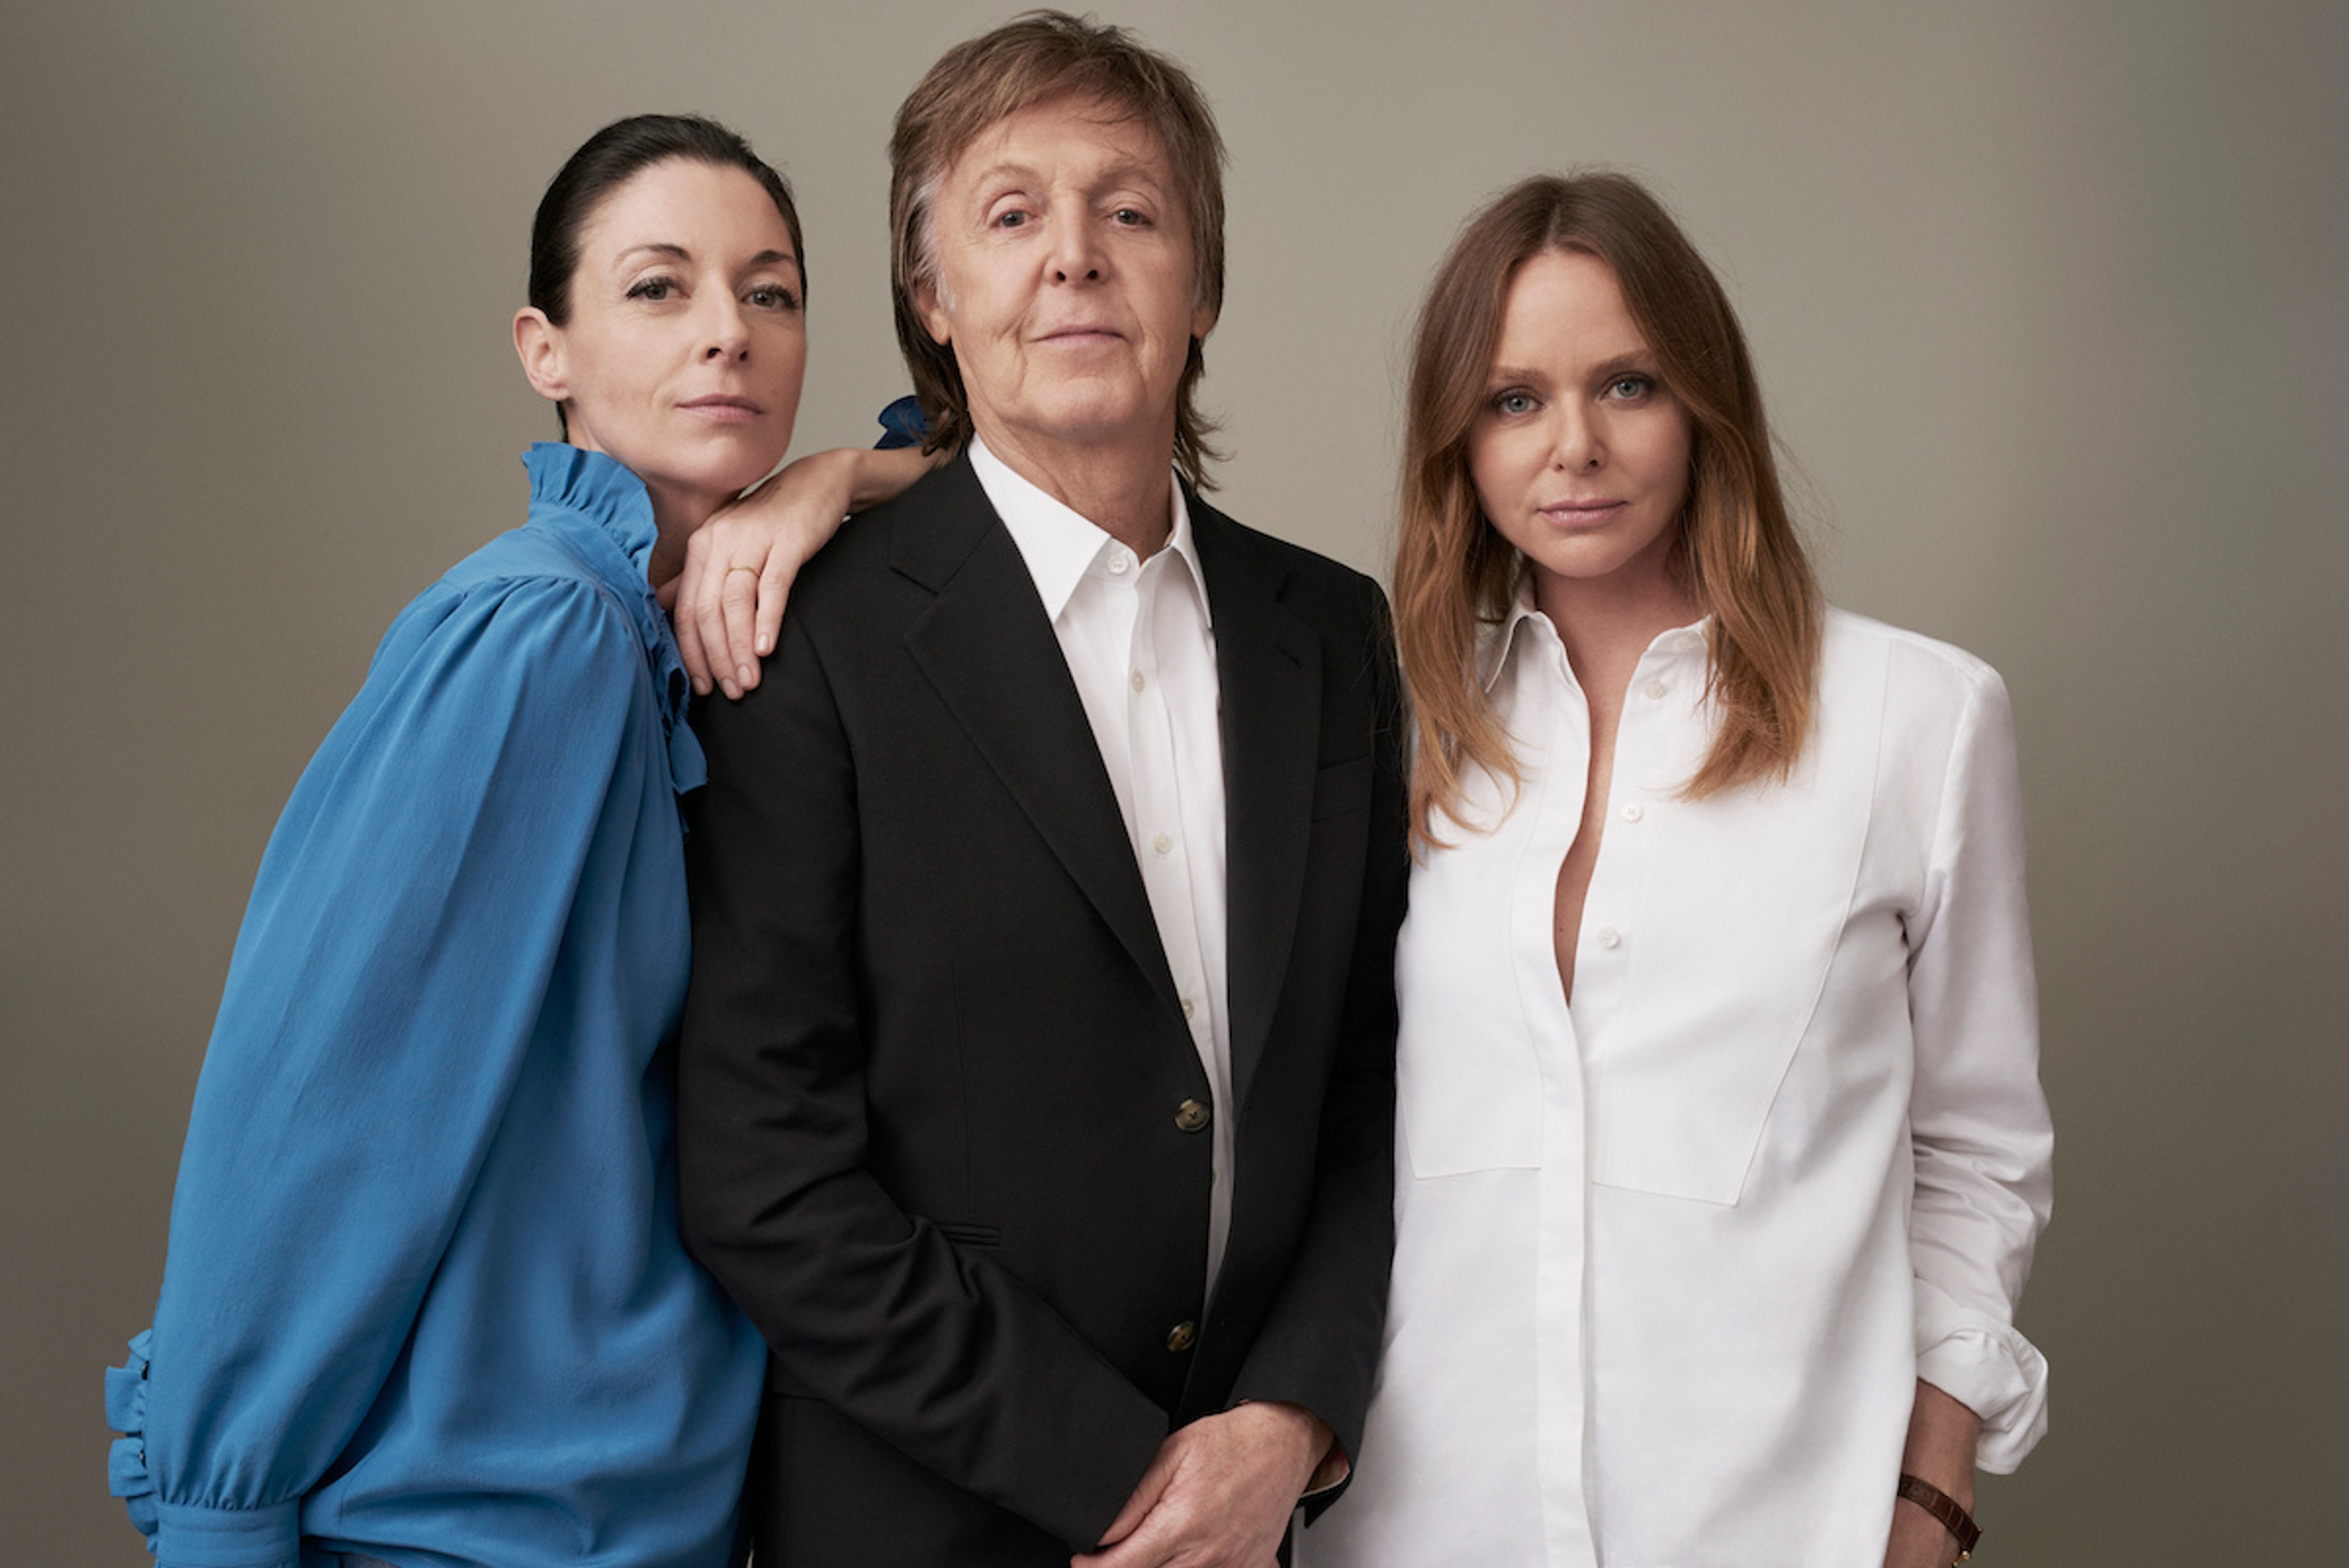 The McCartney’s 'Meat Free Monday' campaign launched a documentary short to highlight the damaging environmental impact of animal agriculture. 